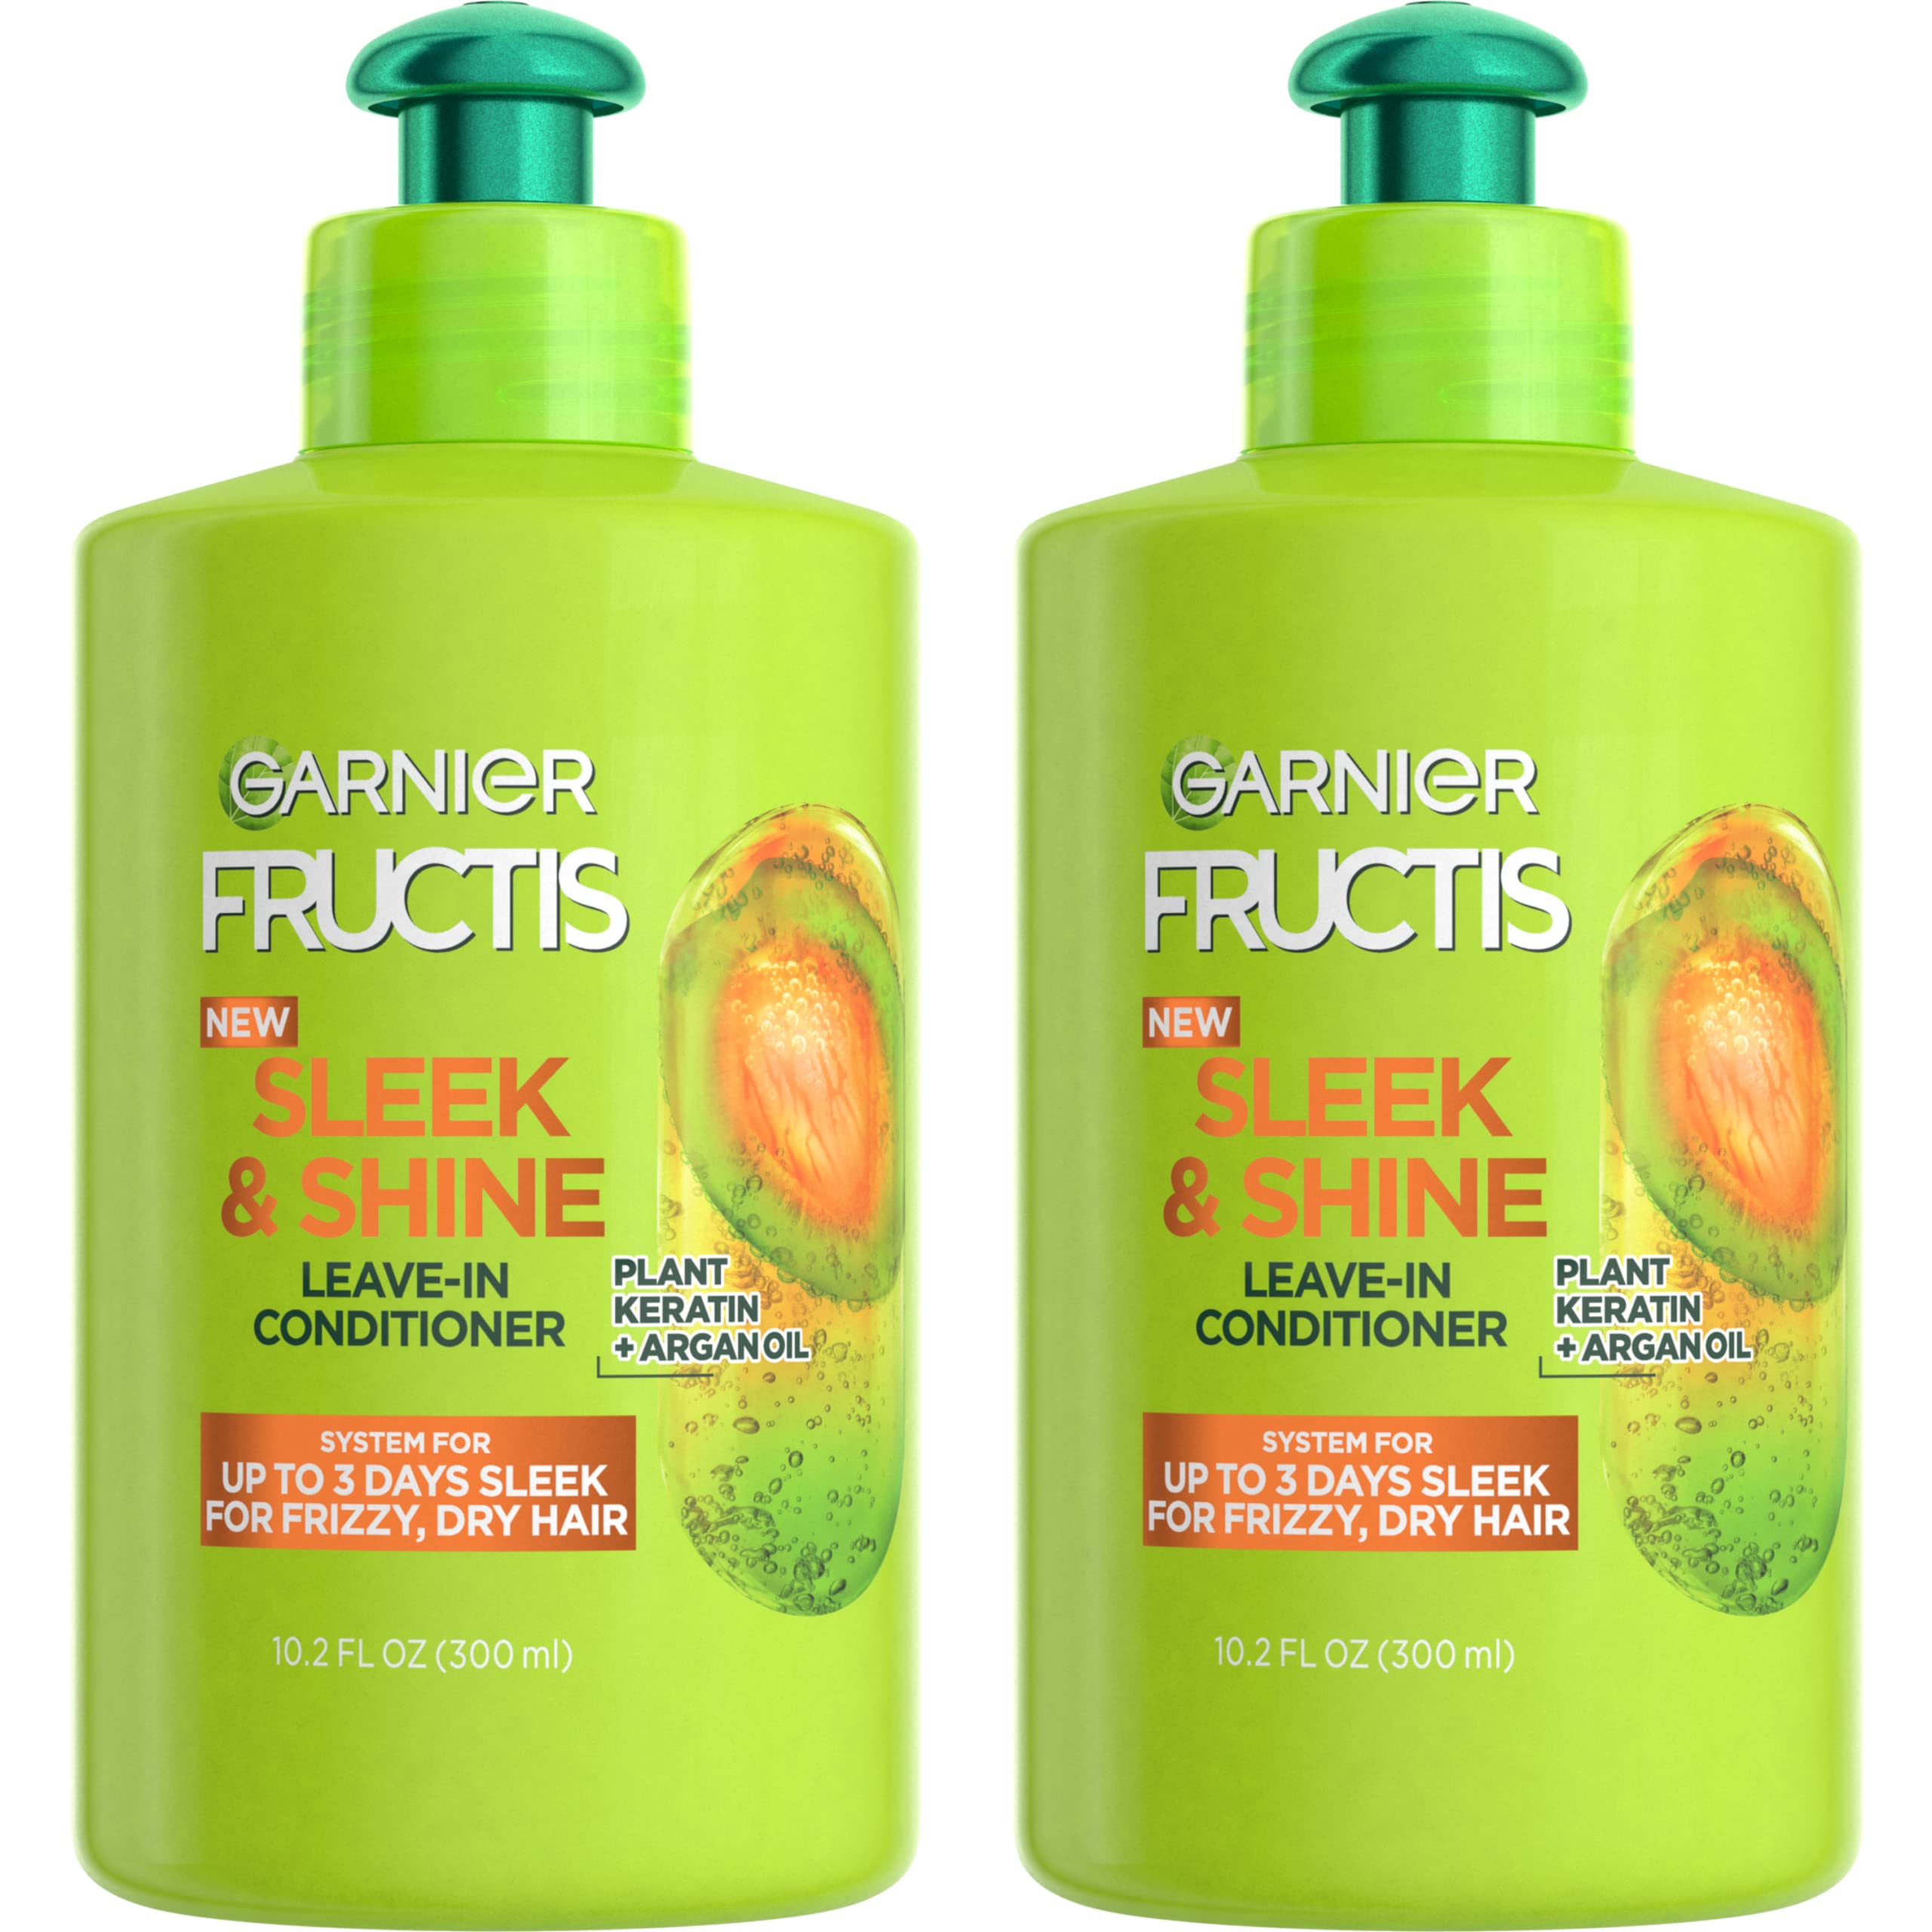 Garnier Fructis Sleek & Shine Leave-In Conditioning Cream for Frizzy, Dry Hair, Plant Keratin + Argan Oil, 10.2 Fl Oz, 2 Count & Fructis Style Pure Clean Styling Gel 6.8 Fl Oz, 1 Count,